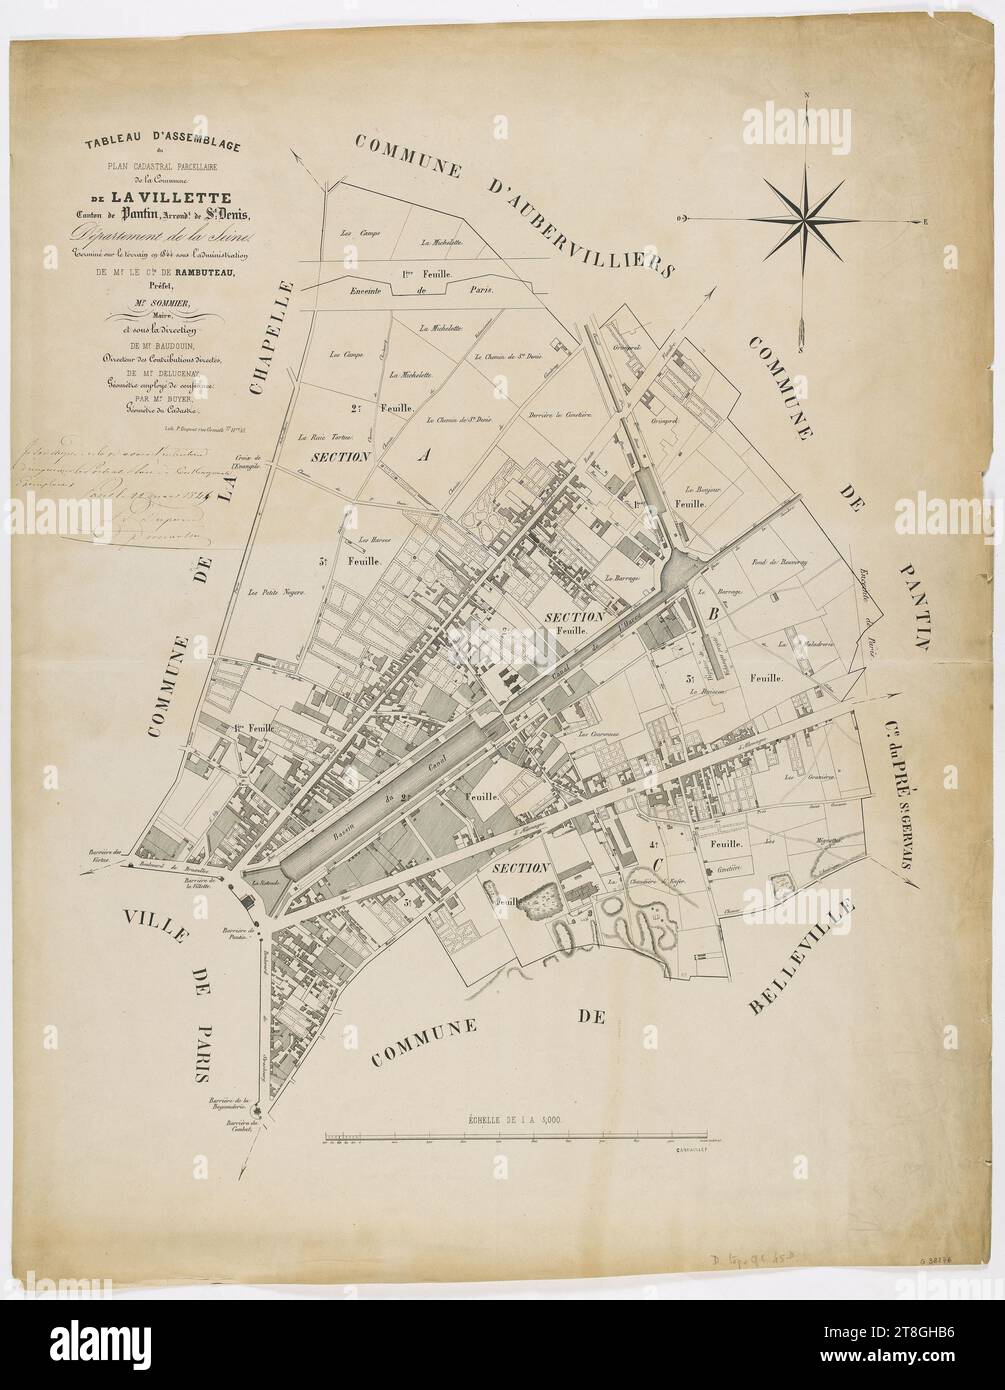 Assembly table, of the plot cadastral plan, of the Commune, of Villette, Canton of Pantin arrondt of St Denis, Engraver, Unknown, Publisher, Print, Graphic arts, Map (geography, astronomy), Photomechanical process, Dimensions - Work: Height: 70 cm, Width: 55 cm Stock Photo